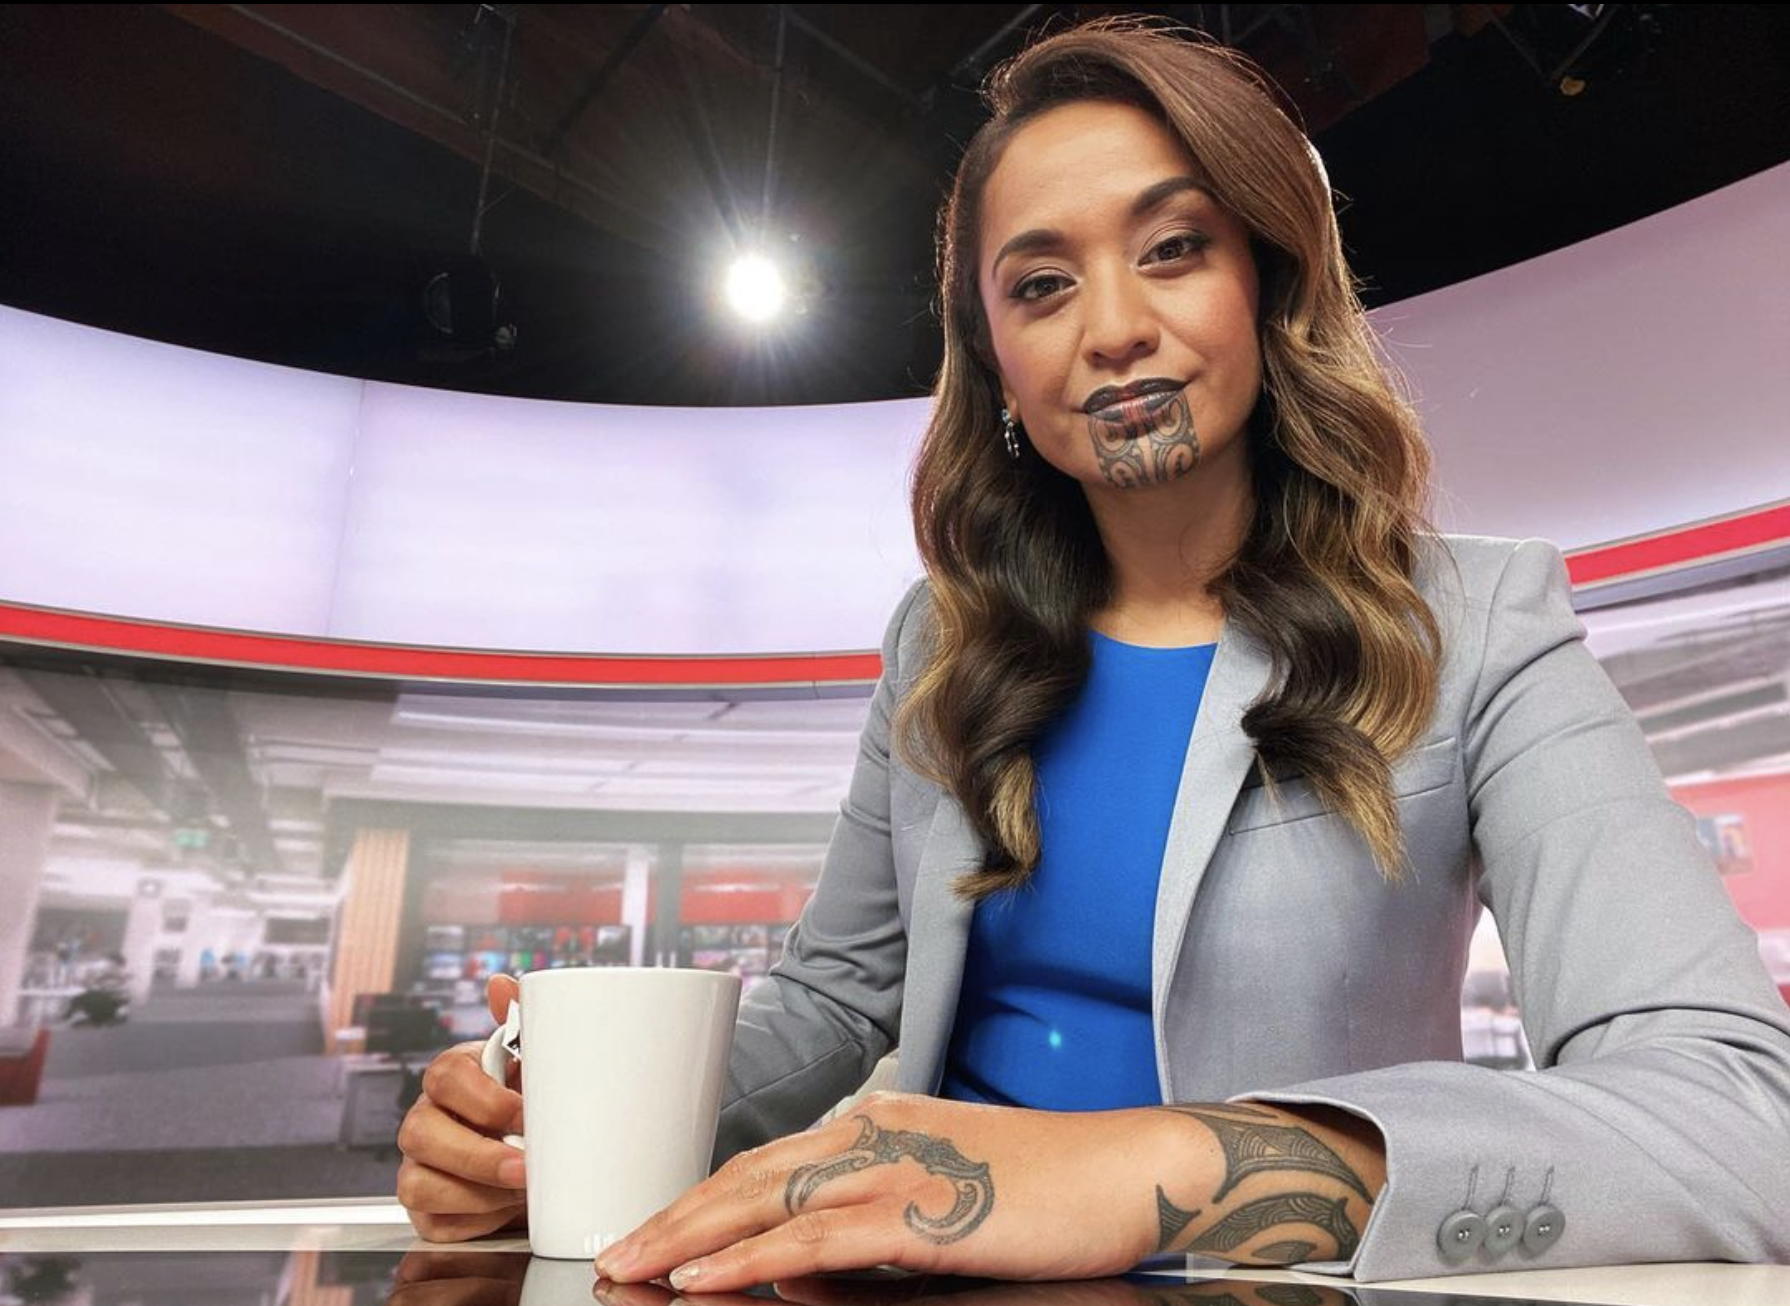 Newshub Live 430 presenter Oriini Kapaira takes a picture in her newsroom, making history as the first person to present news with a Māori tattoo.